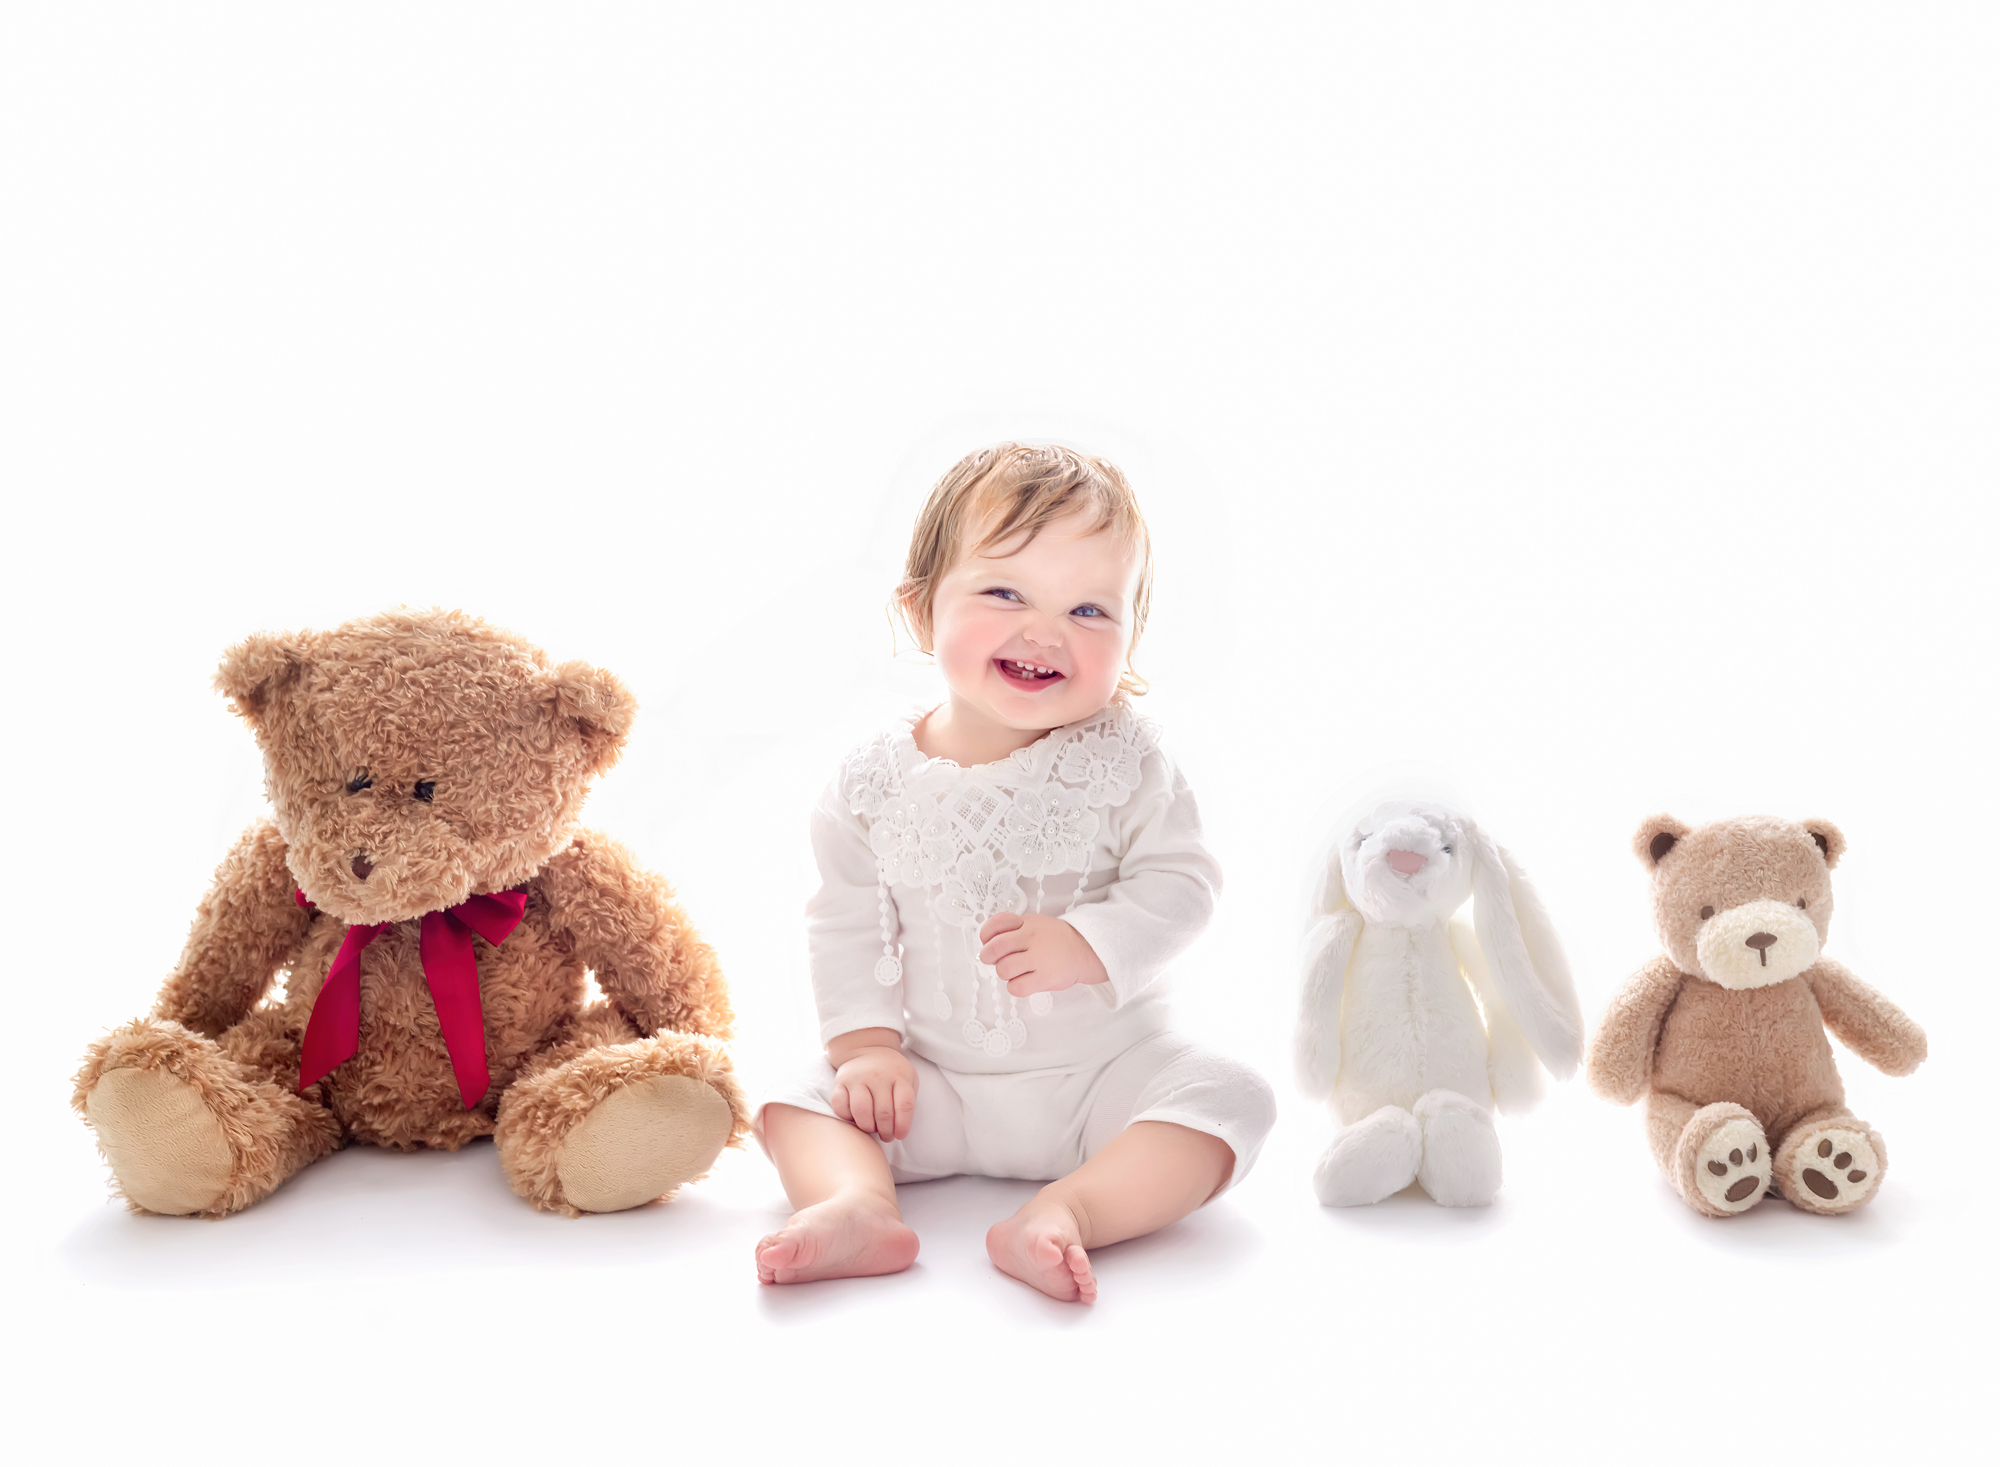 Playing with teddy bears section of 1st Birthday photography session, Fairy Nuff Photography, Nottingham. Baby girl photographed against white with teddies.